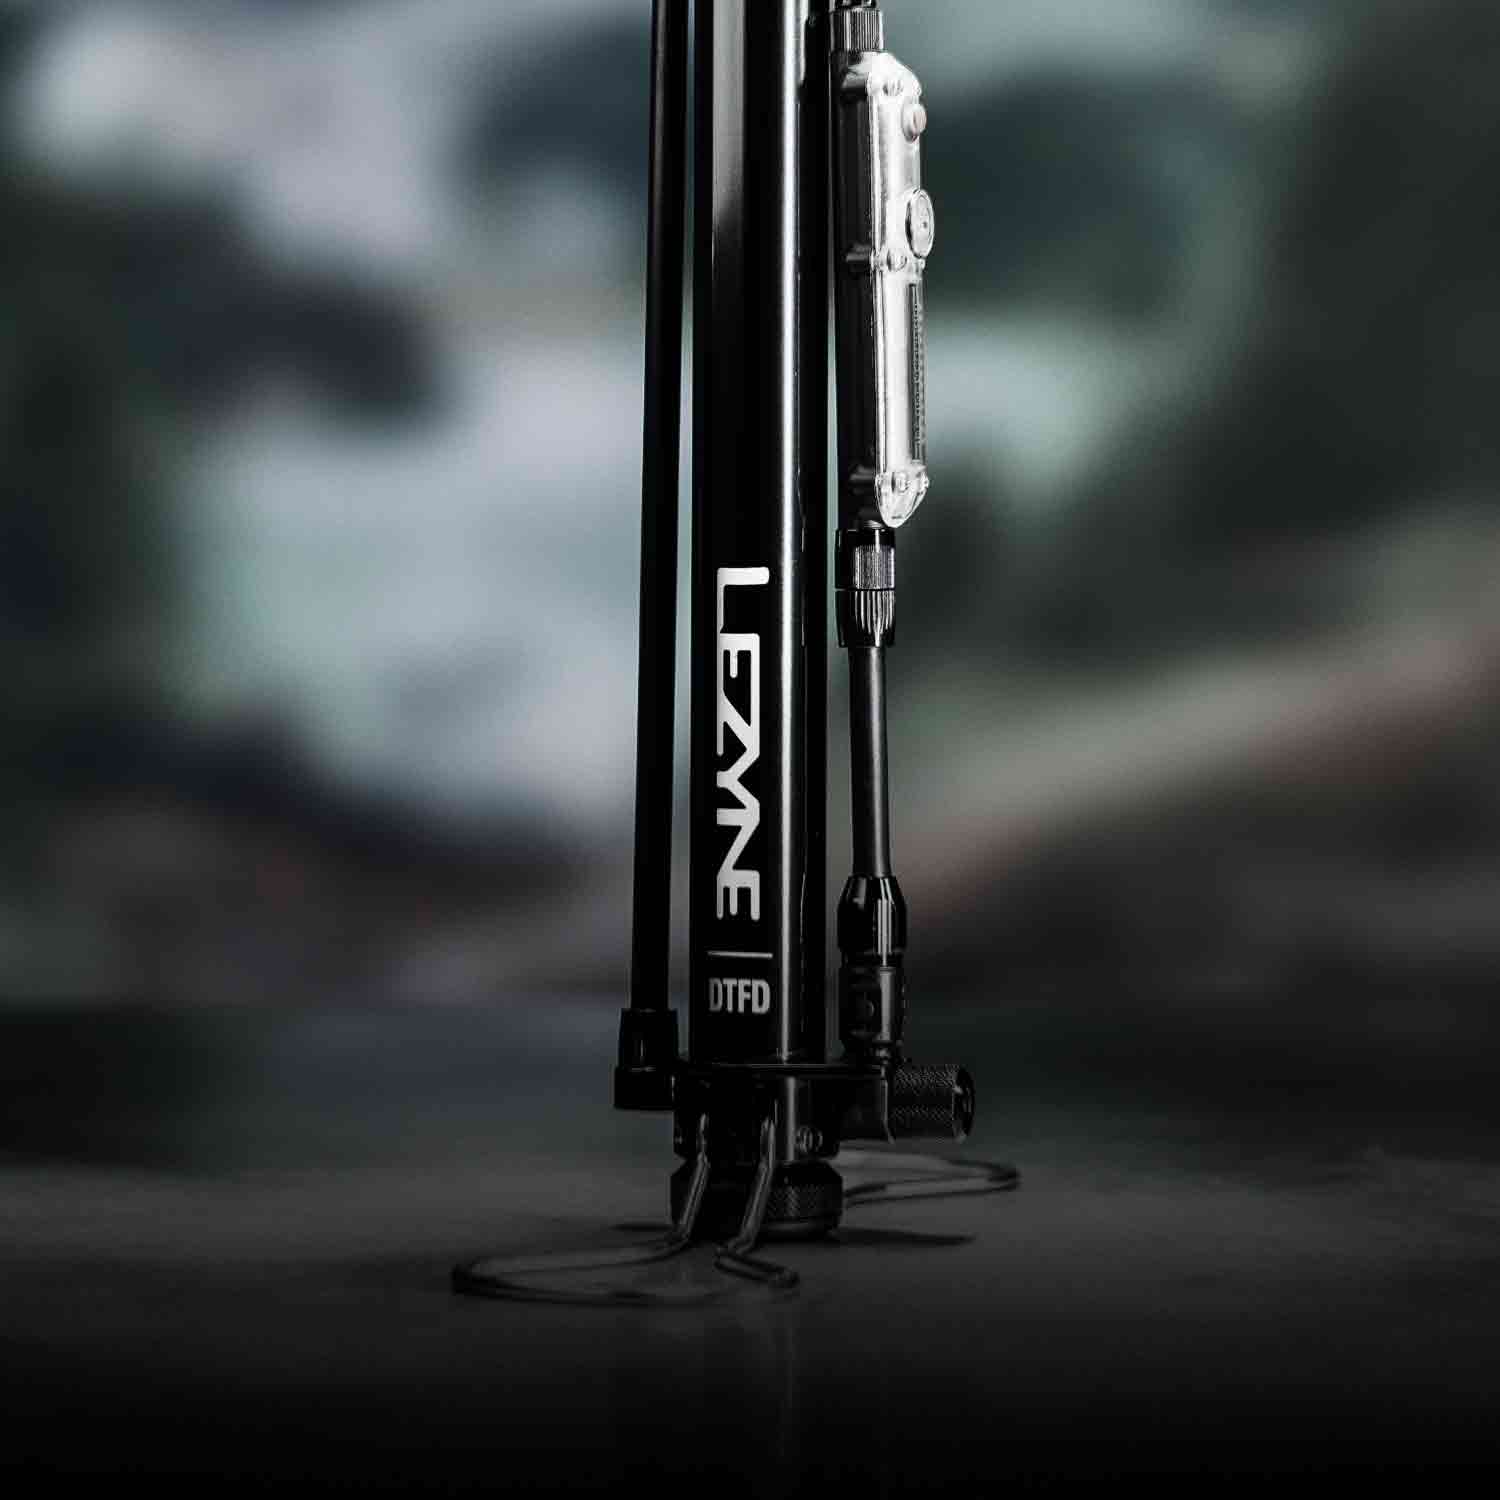 The base of a portable bicycle pump with the words Lezyne DTFD printed on it.